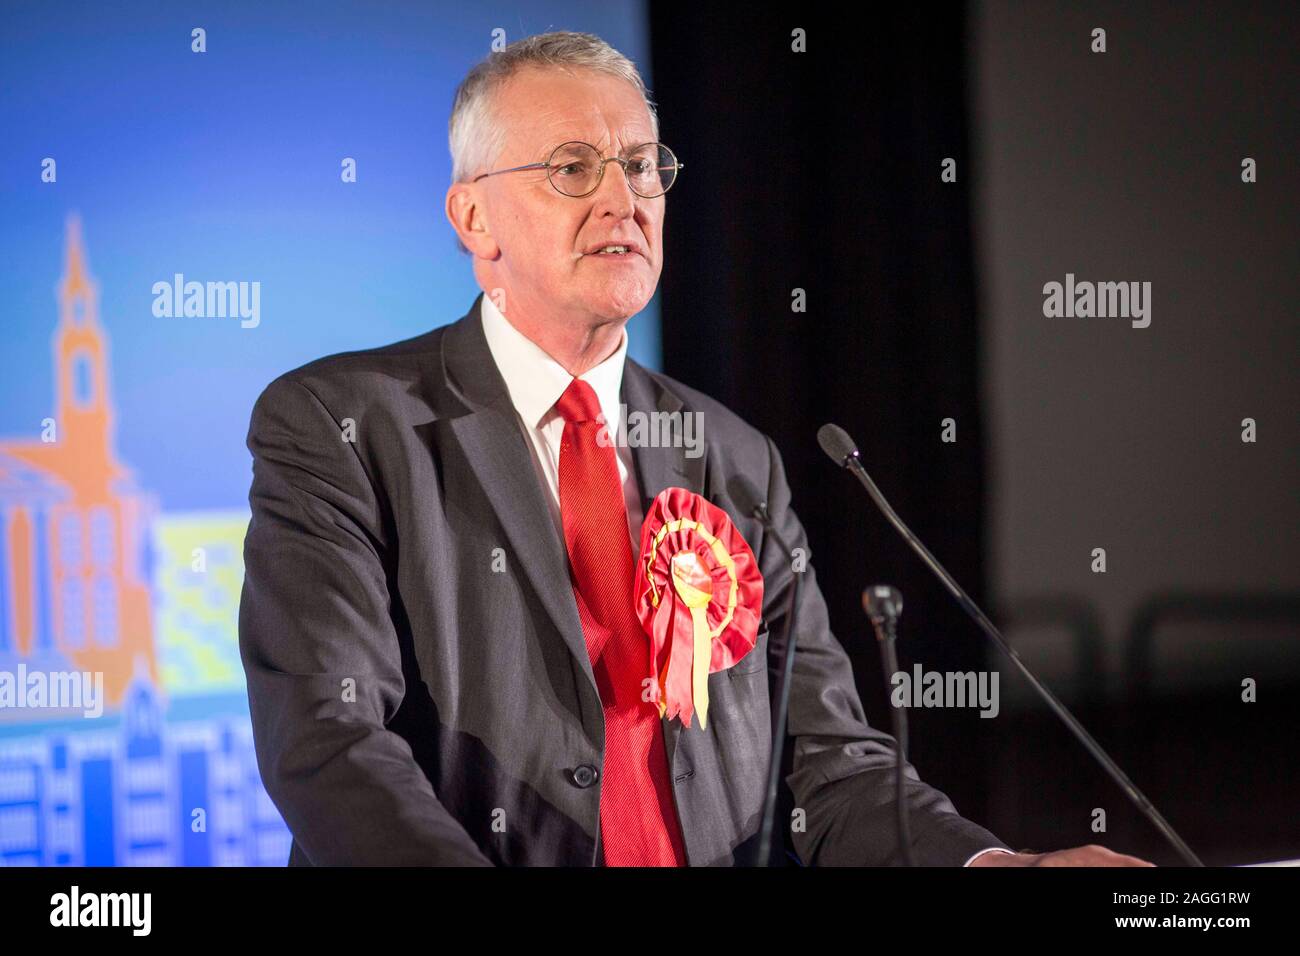 Picture by Chris Bull   13/12/19 General Election 2019 count and results at Leeds Arena. Leeds Central Labour candidate Hilary Benn on stage after being declared winner.  www.chrisbullphotographer.com Stock Photo